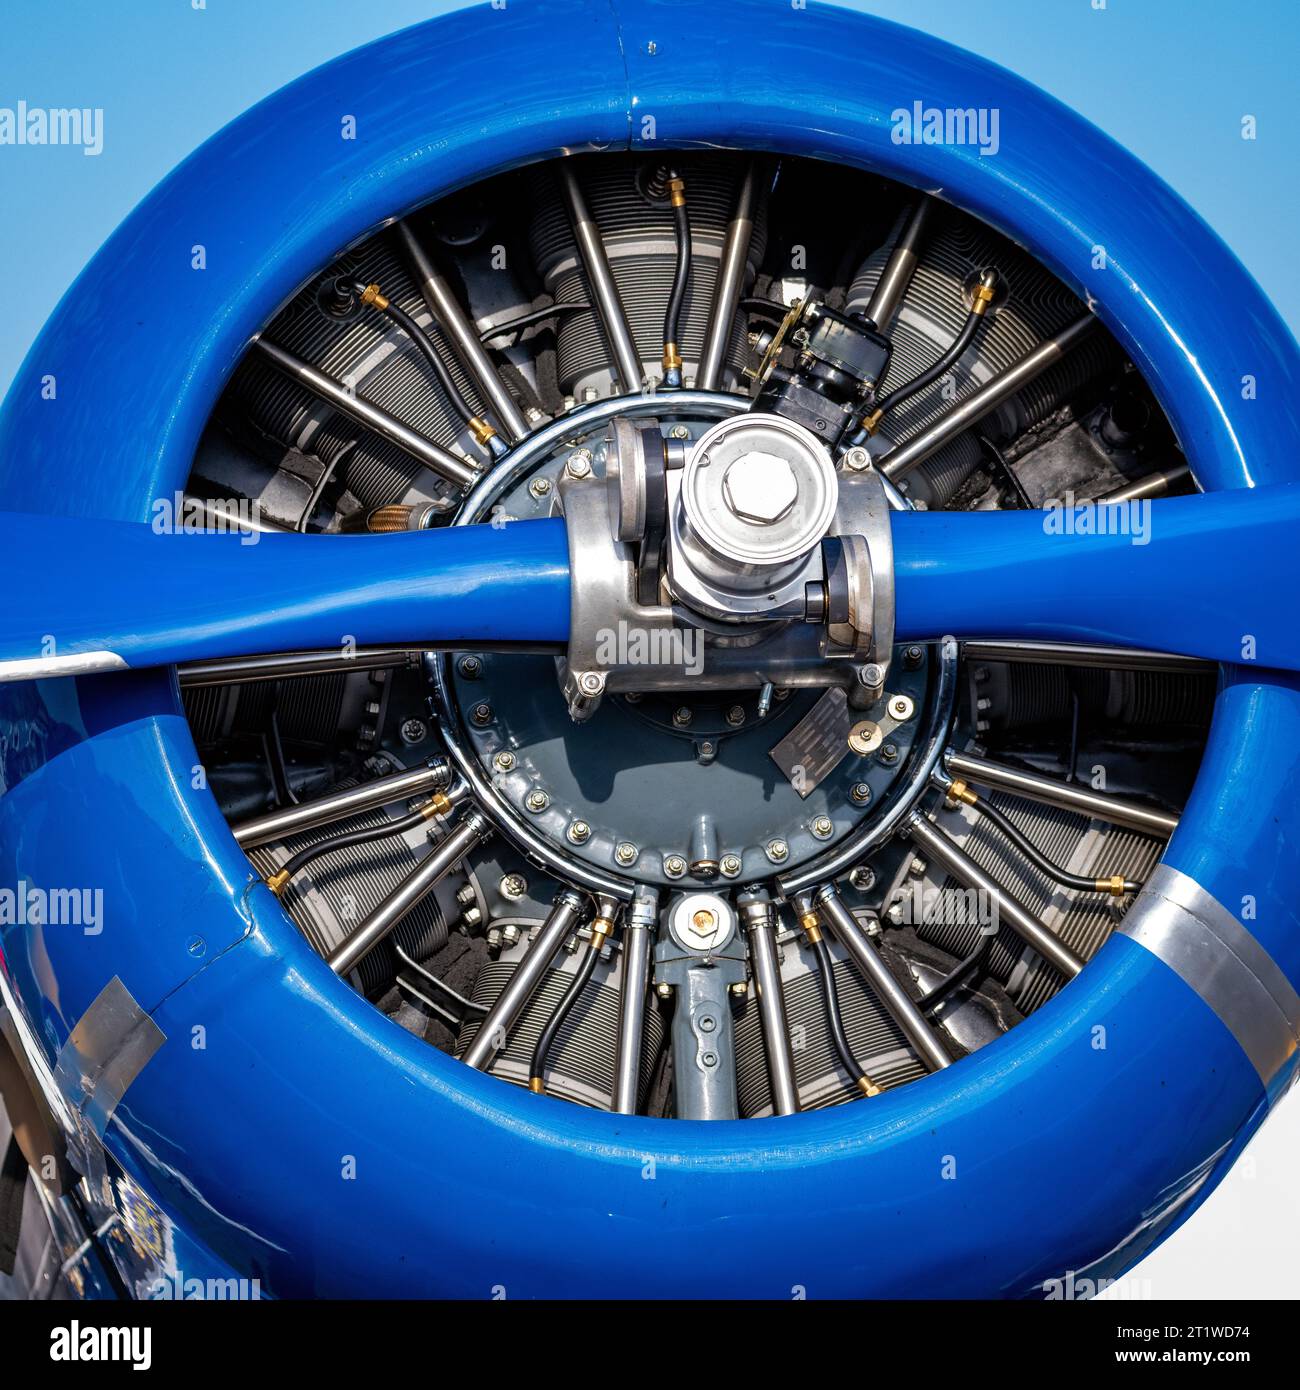 Propeller mount and engine behind blue airplane Stock Photo